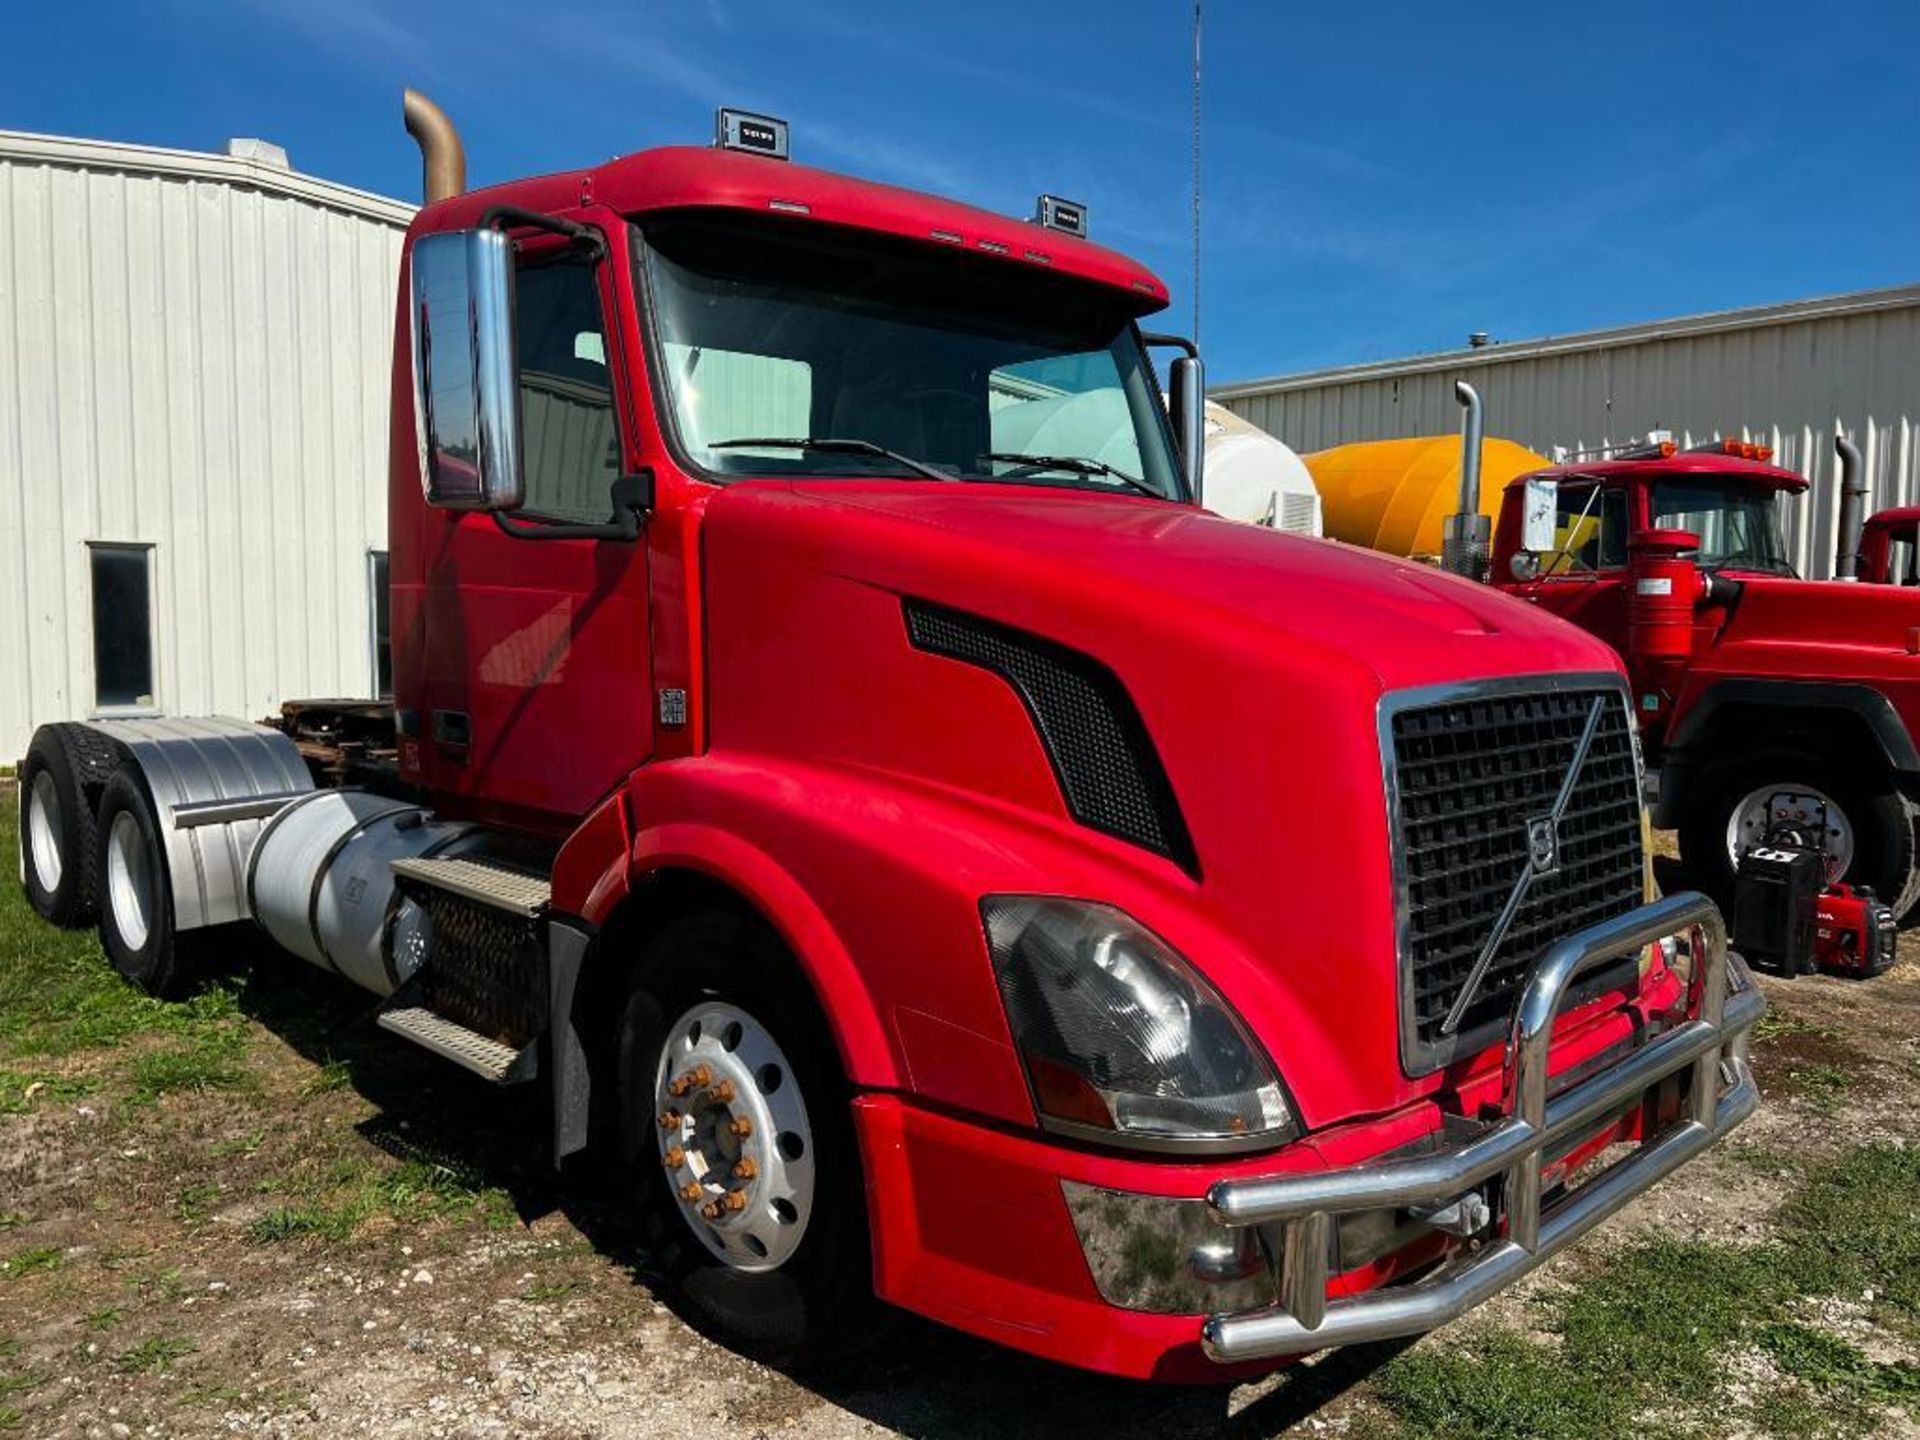 2009 Volvo D13 Tractor/Truck, miles showing 95,814, Easton Fuller 10 Speed Transmission, 435 HP